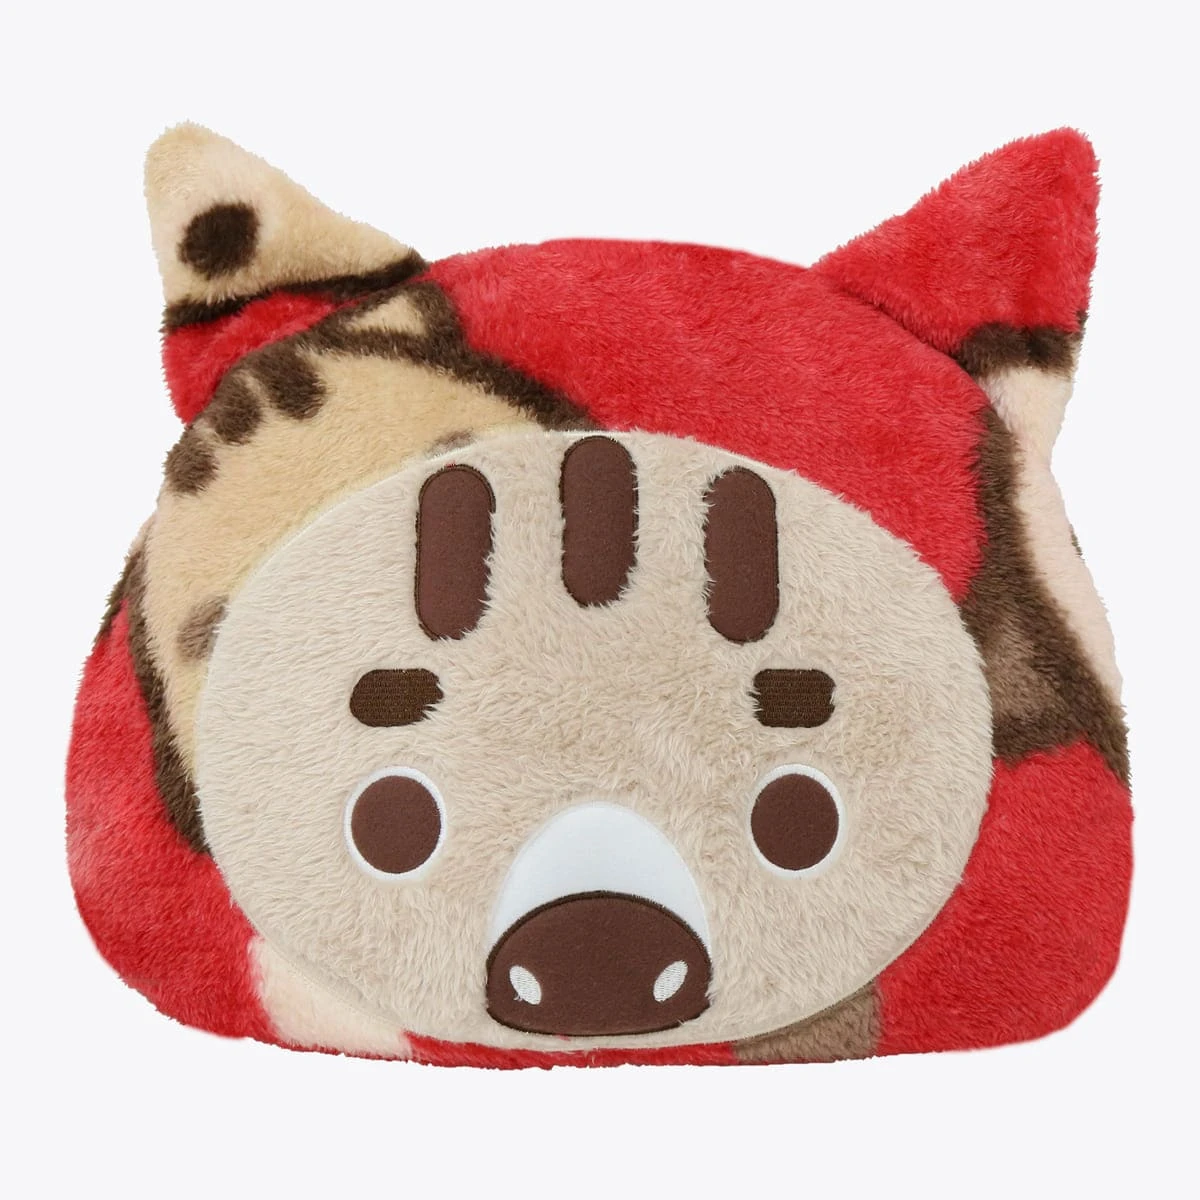 Eddie Face Shape Pillow Blanket with My Gang Printed Plush Blanket